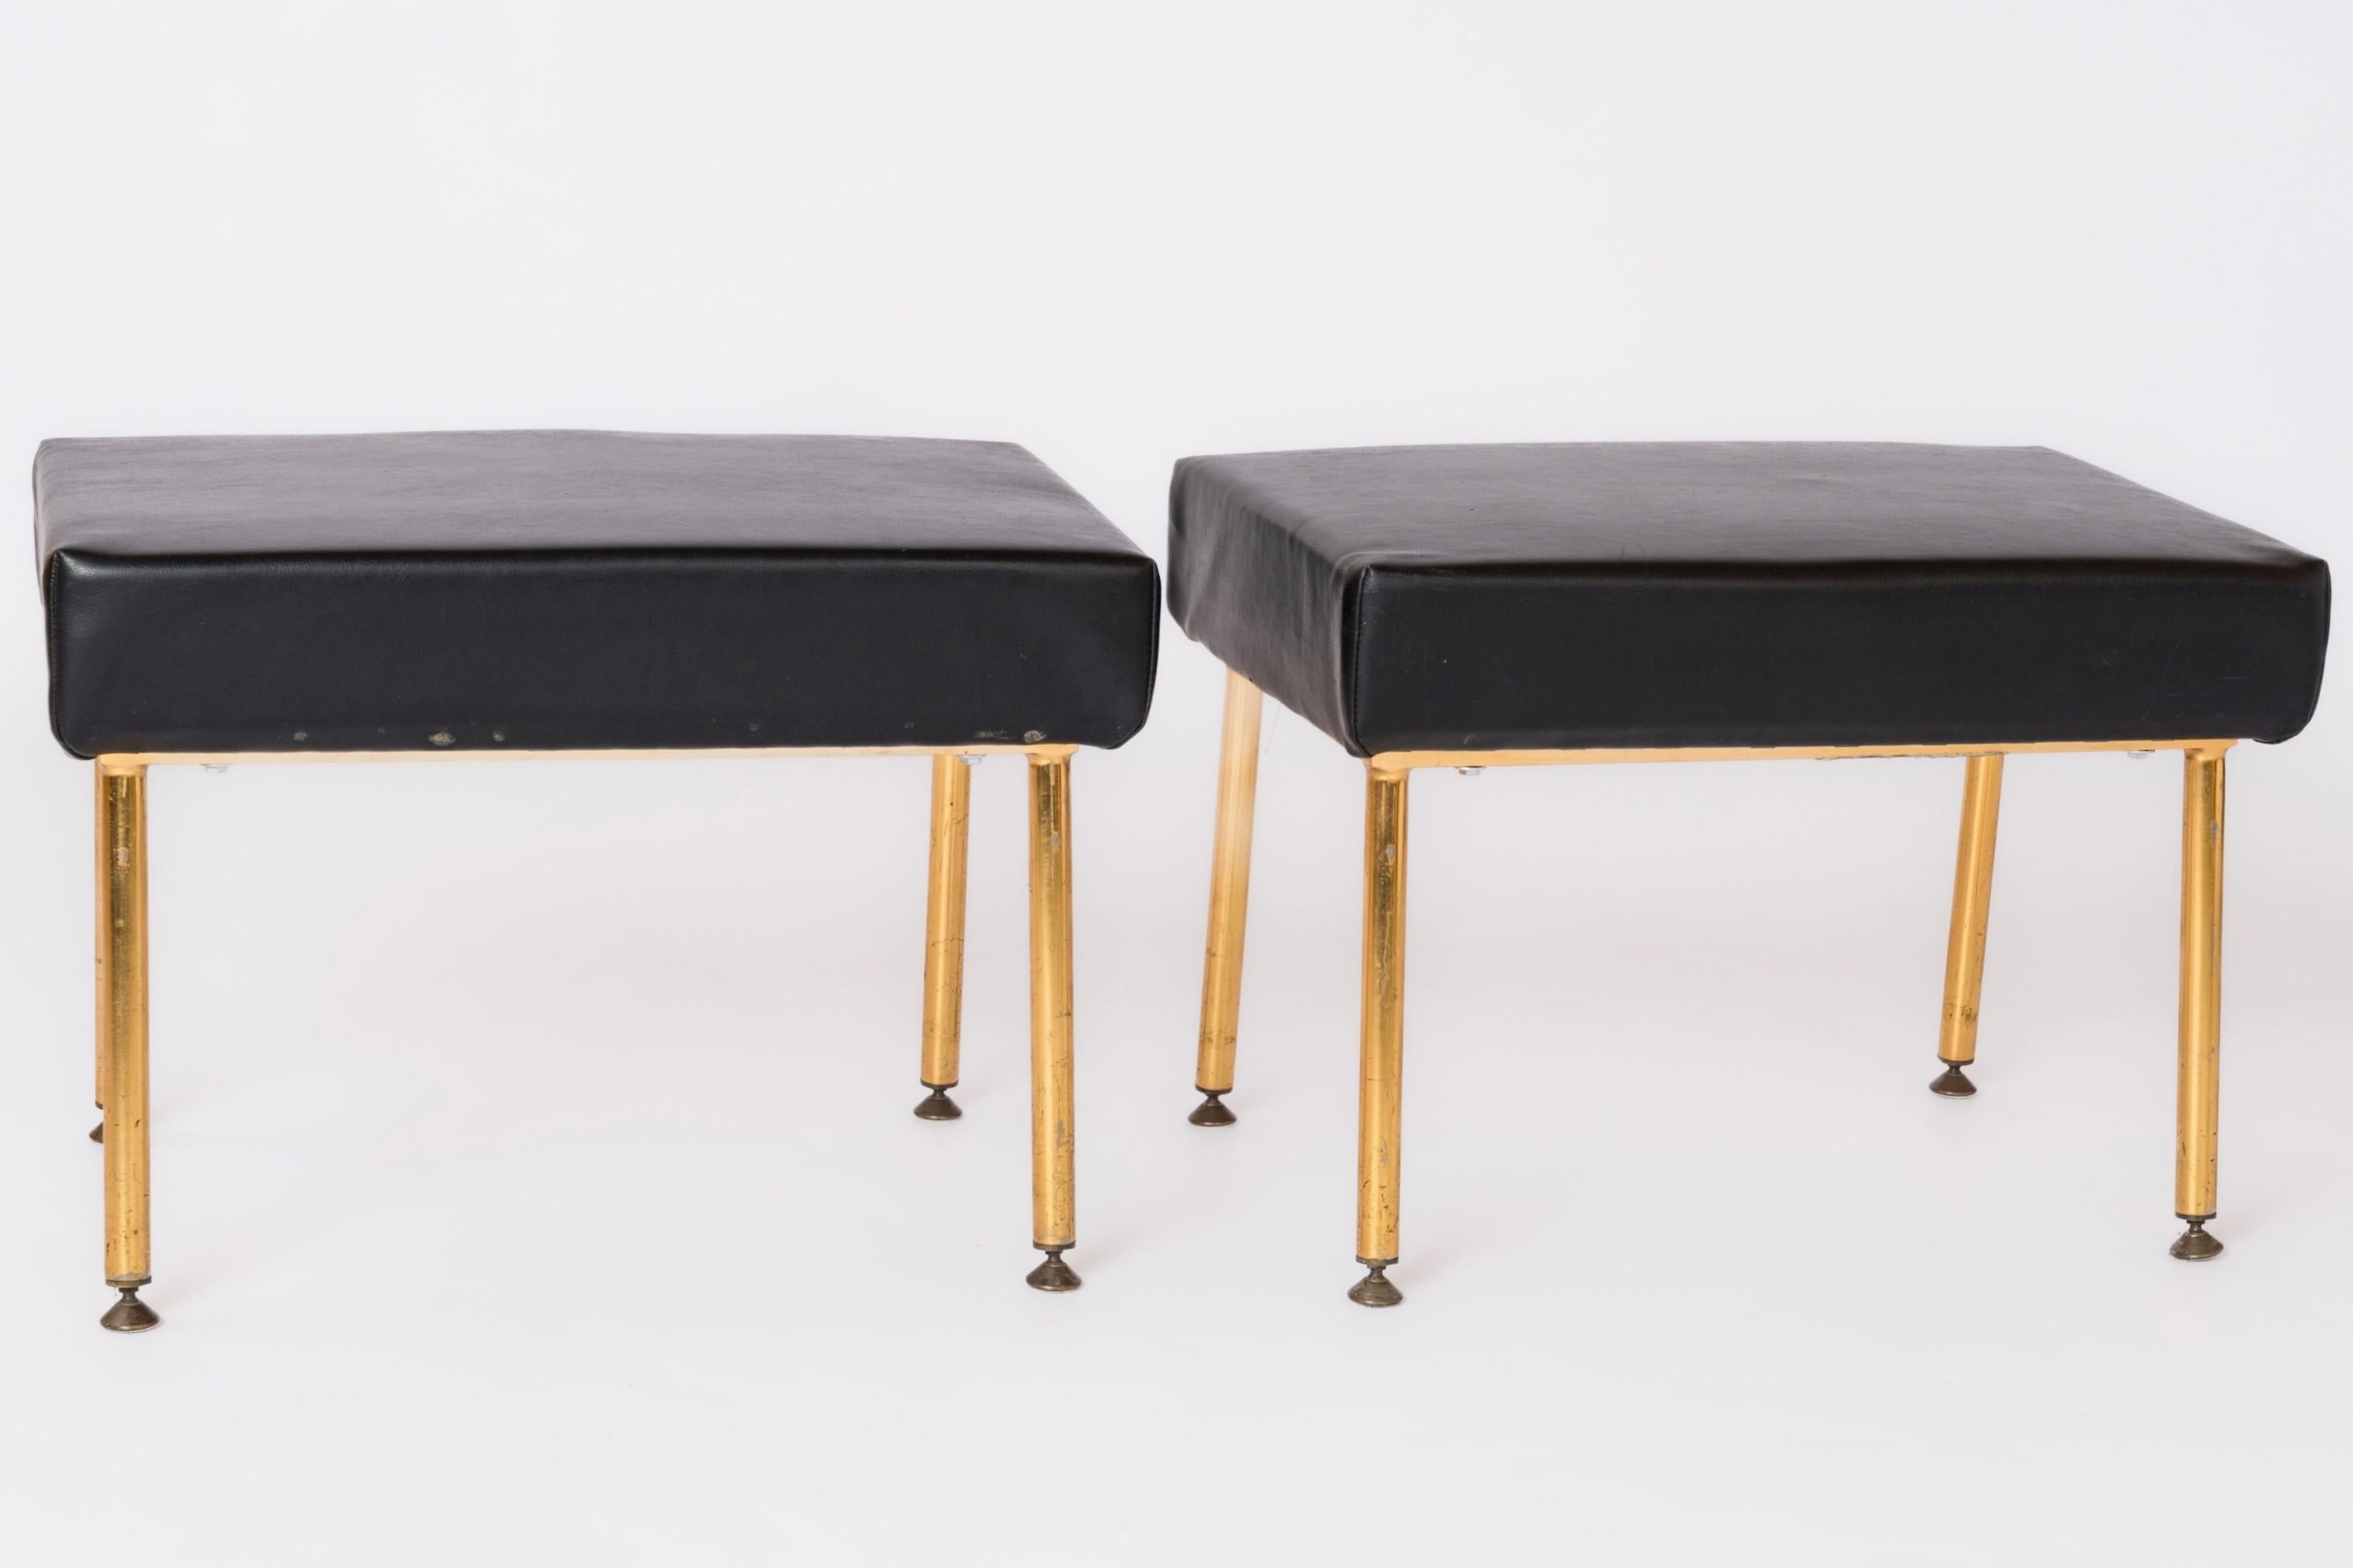 Pair of Gilt Metal & Moleskine Footstools or Benches by Airborne - France 1960's For Sale 1